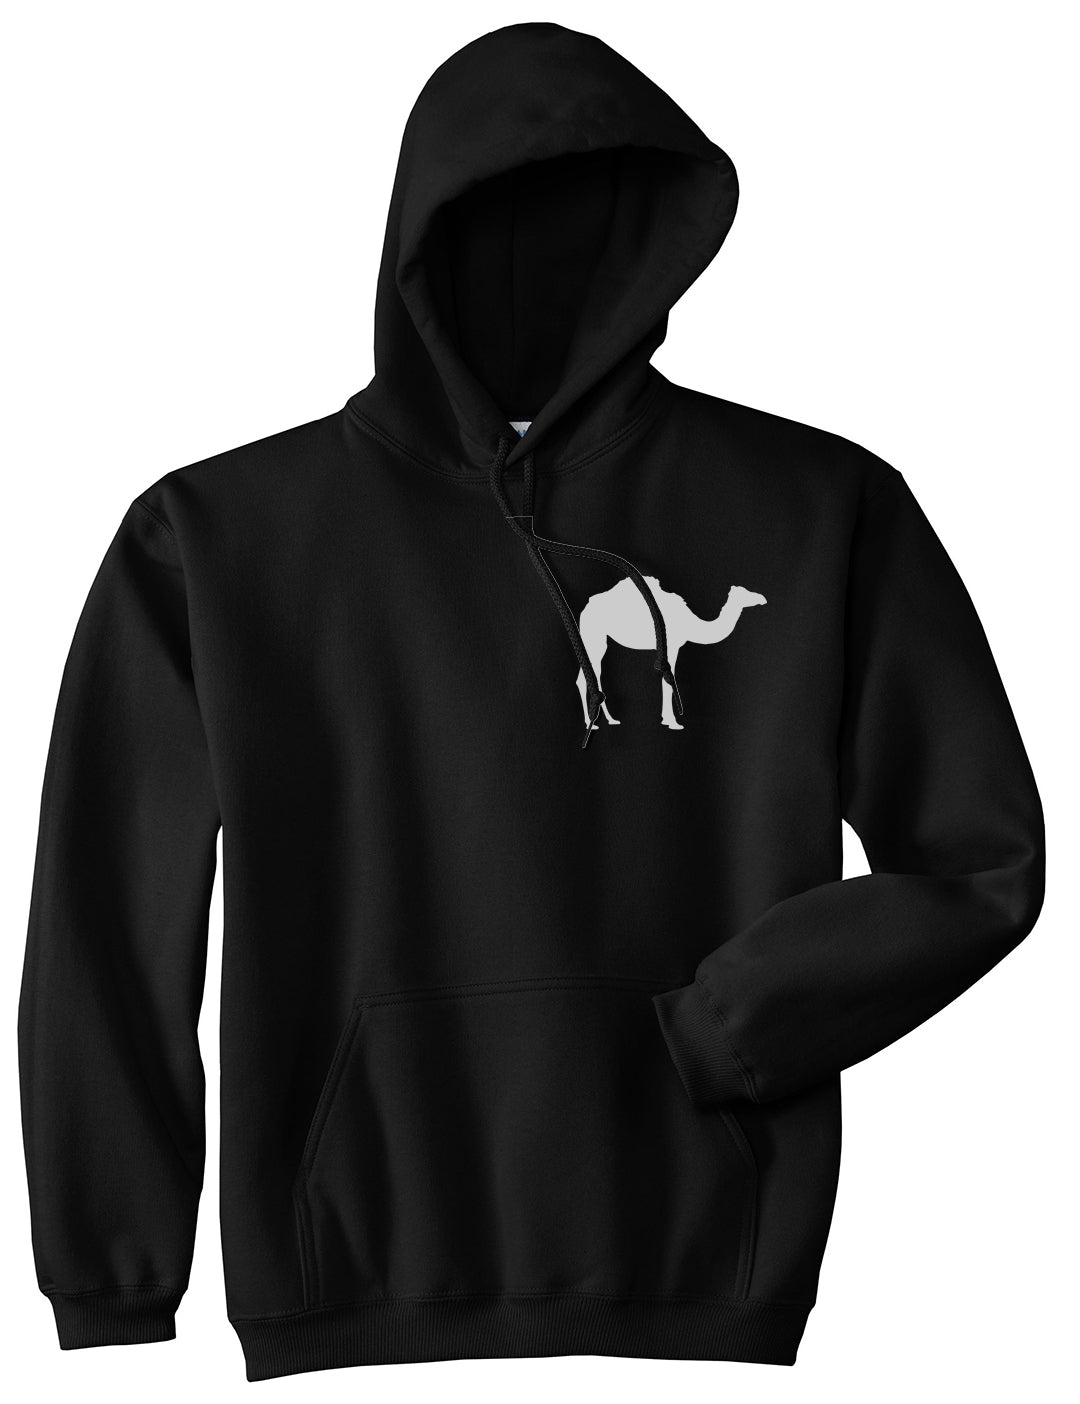 Hump Day Camel Chest Black Pullover Hoodie by Kings Of NY